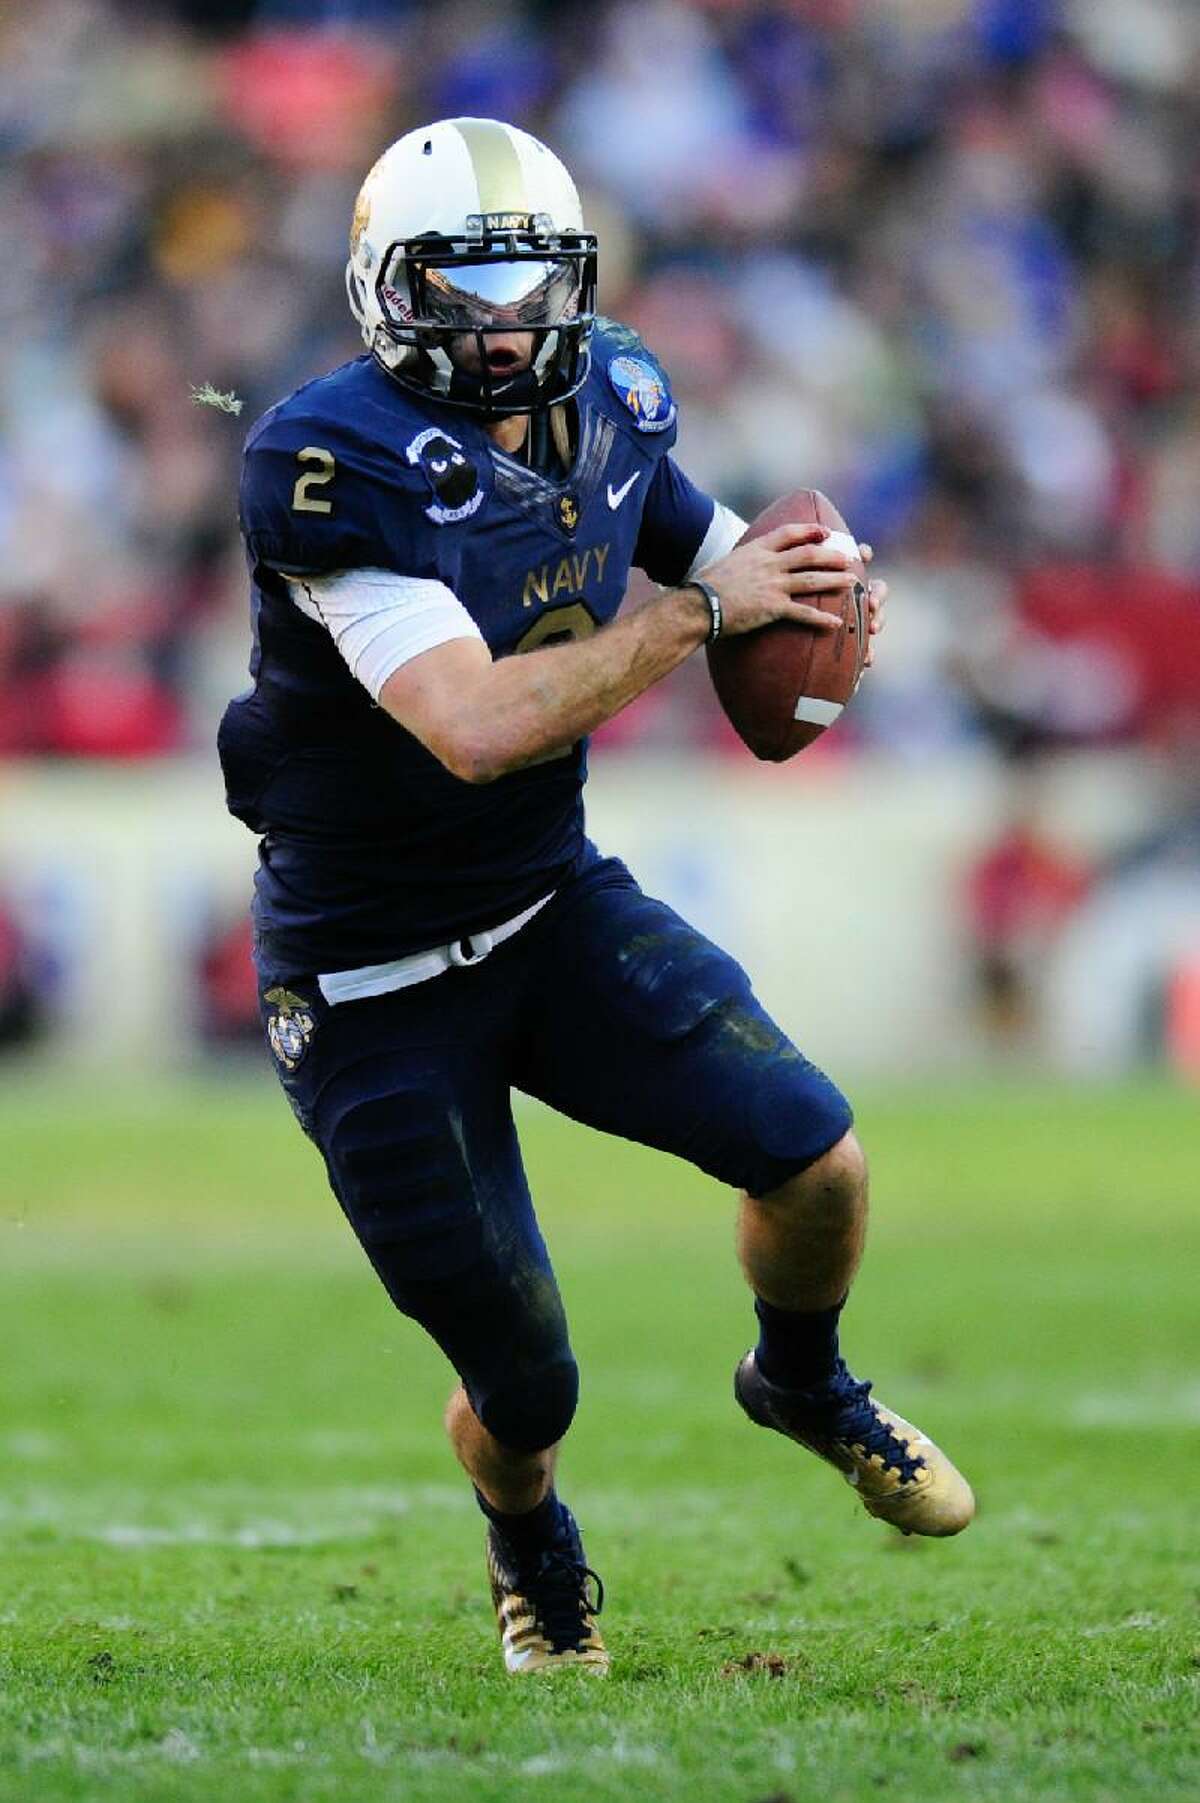 ASSOCIATED PRESS Navy QB Kriss Proctor (2) rushes during the 112th matchup between the Army Black Knights and the Navy Midshipmen at FedEx Field in Landover, MD. Navy defeated Army 27-21.